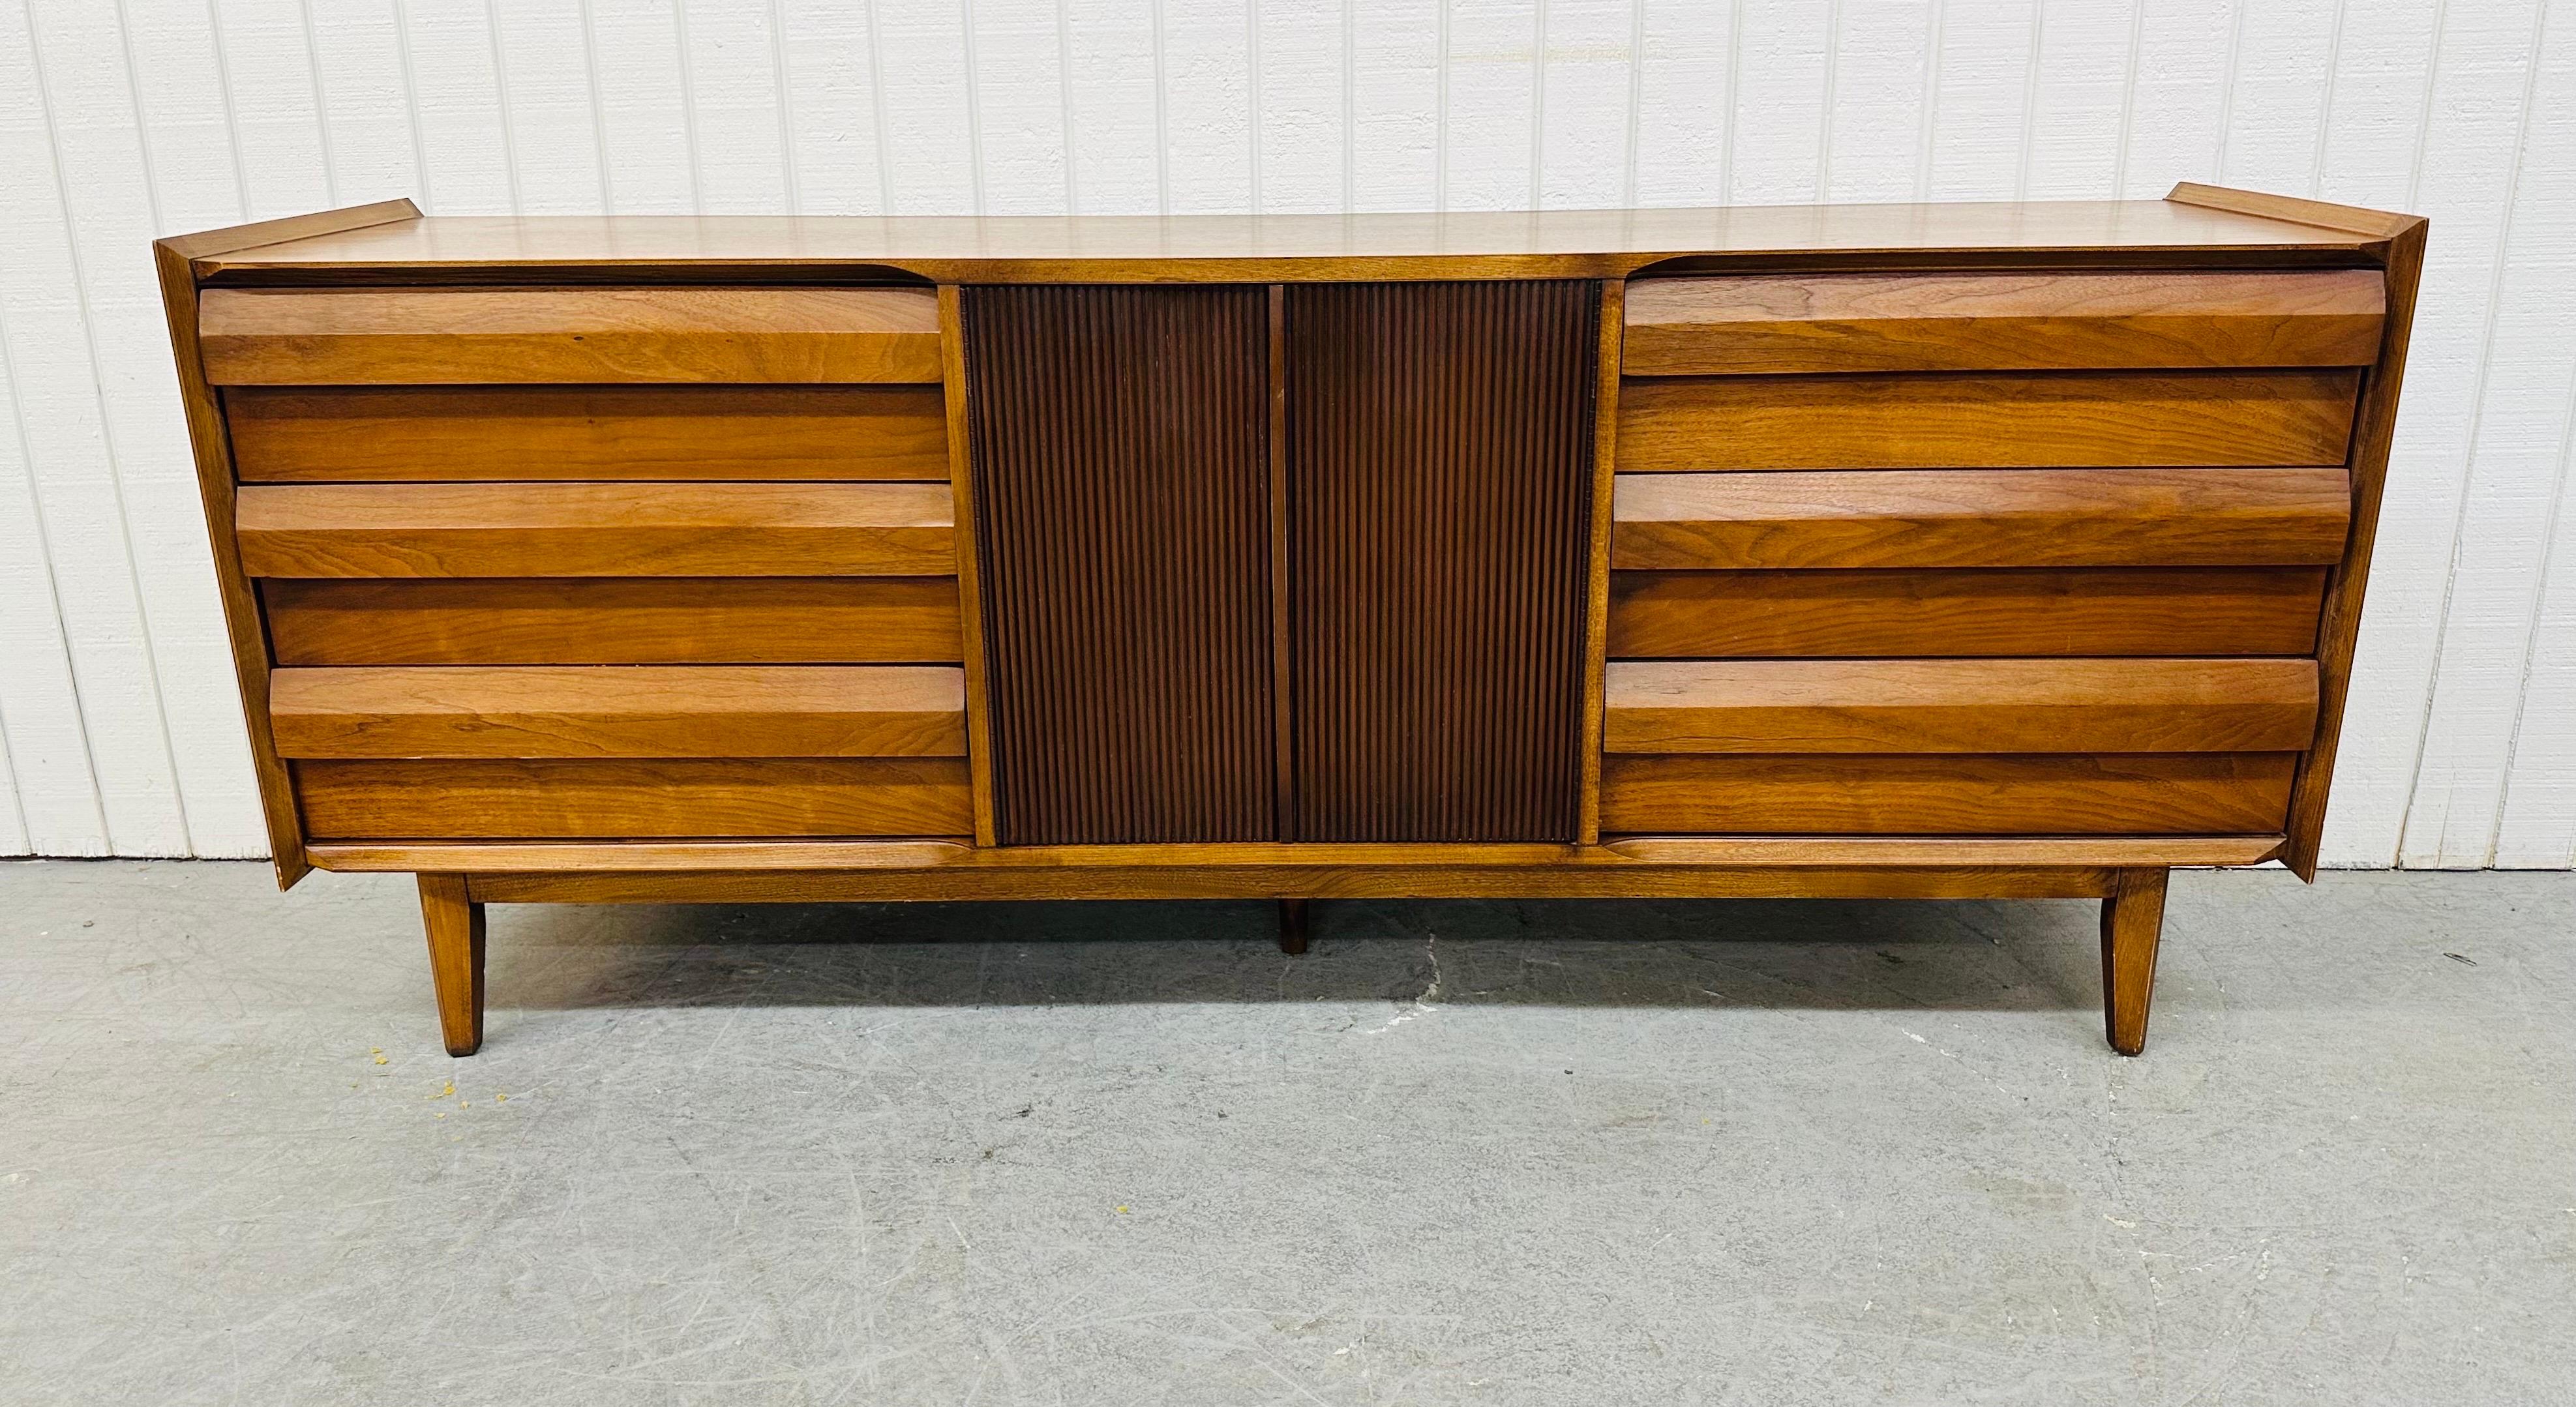 This listing is for a Mid-Century Modern Lane “1st Edition” Walnut Triple Dresser. Featuring a straight line design, three large drawers with louvre style pulls on the left and right side, center doors that open up to three hidden drawers, modern